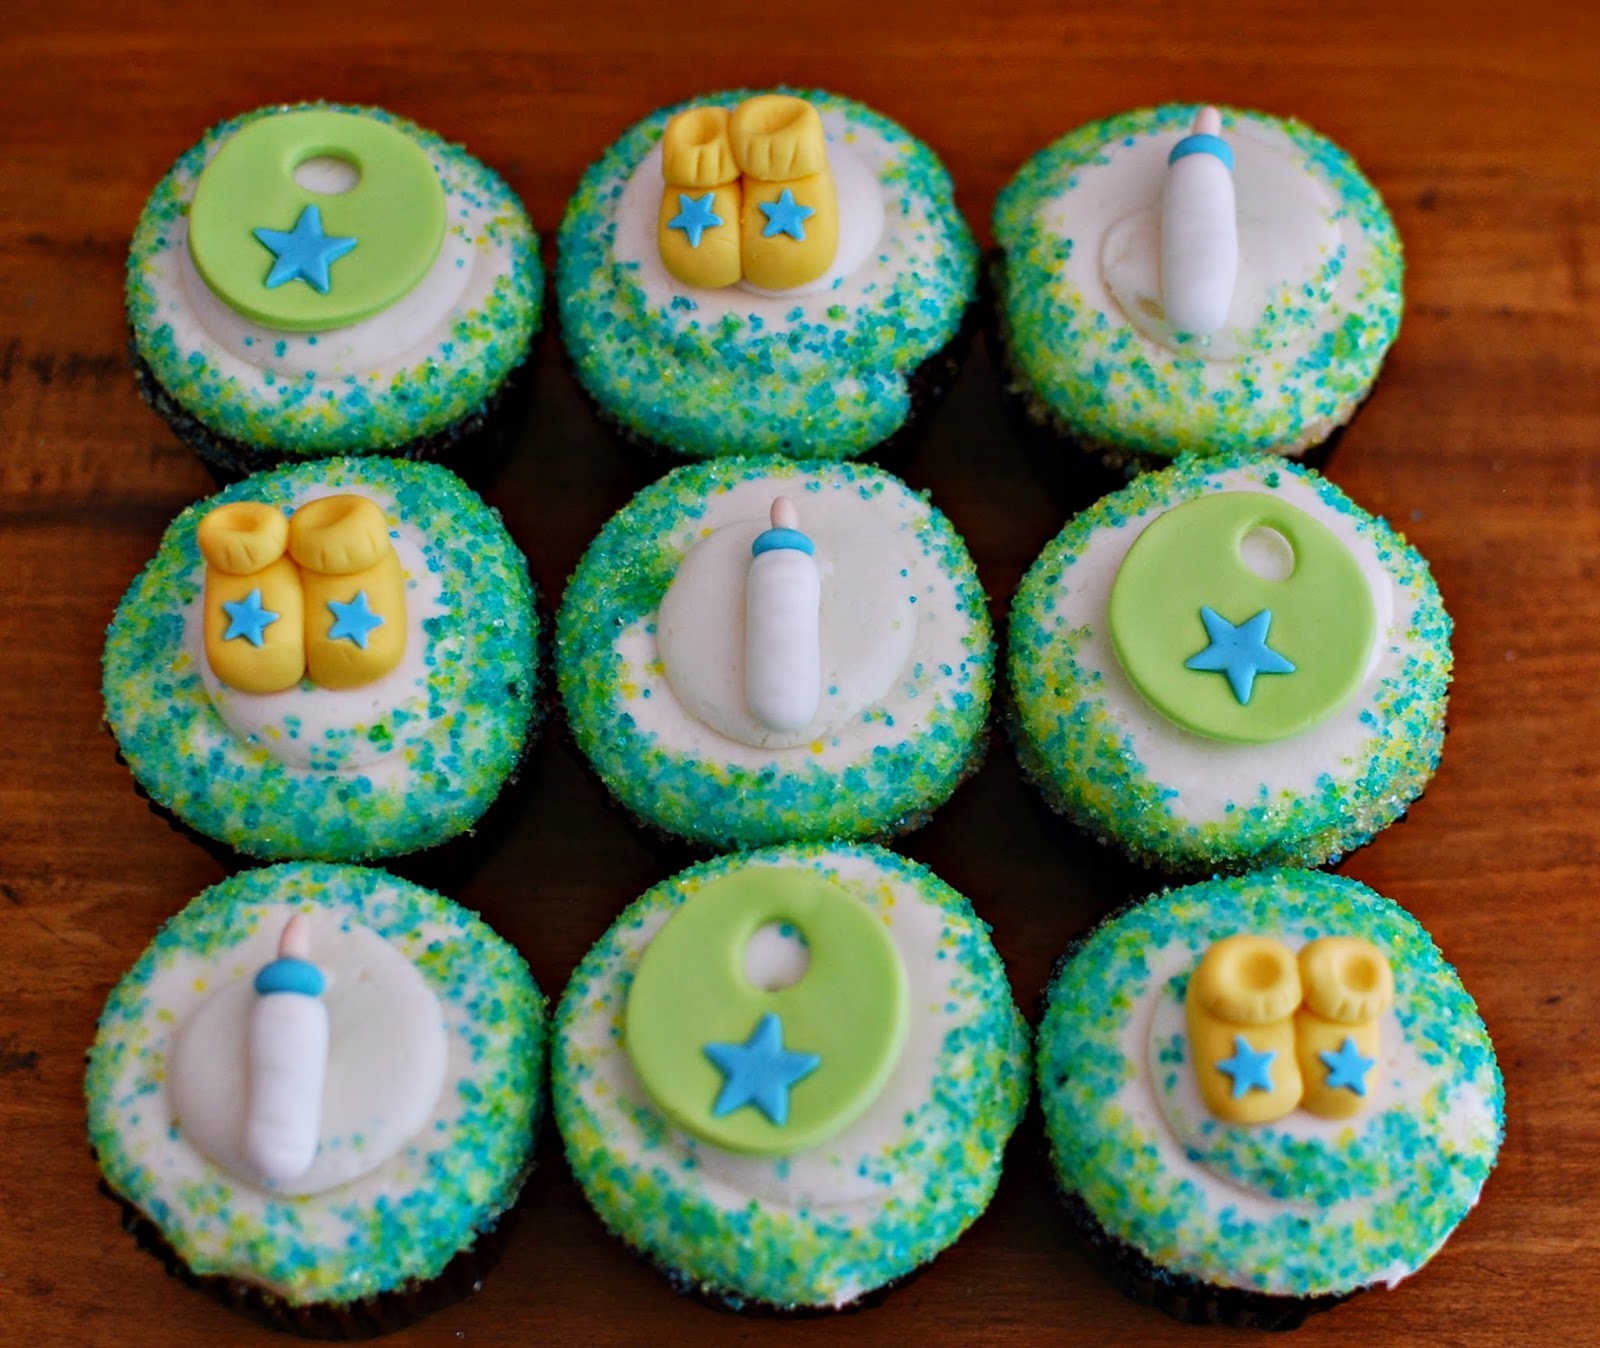 Snacky French: Baby Shower Cupcakes + Baby Bottle Cookie Favors